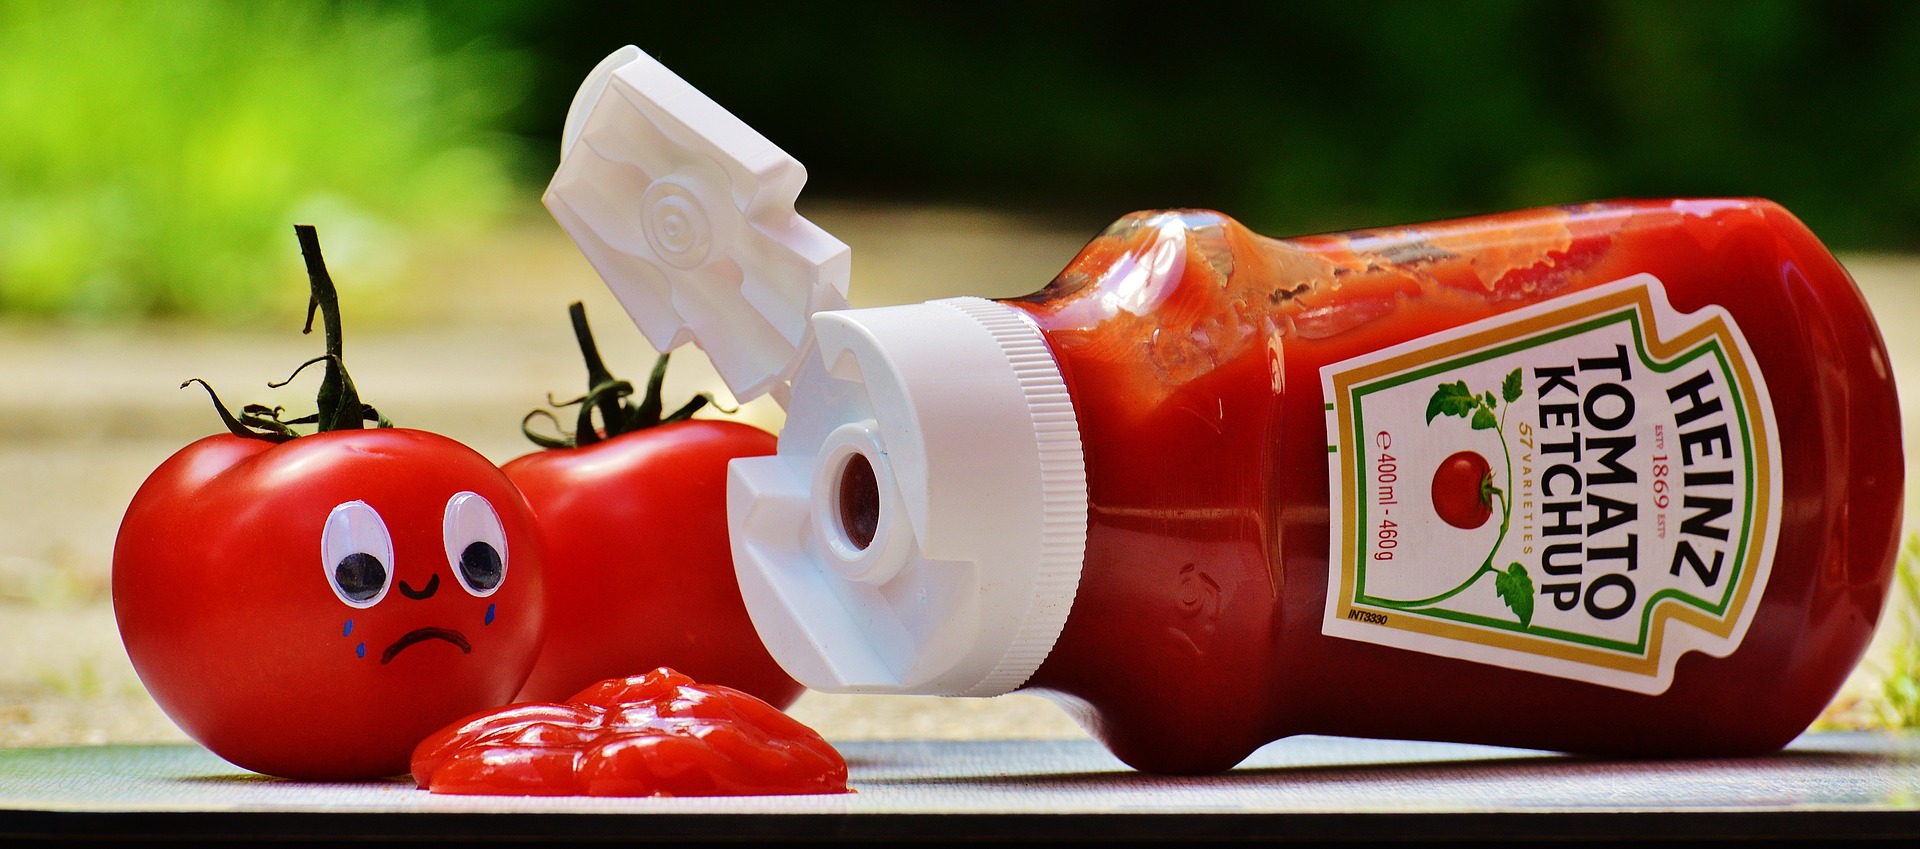 Bad Science on the Internet: Is Heinz Ketchup really bad for you?